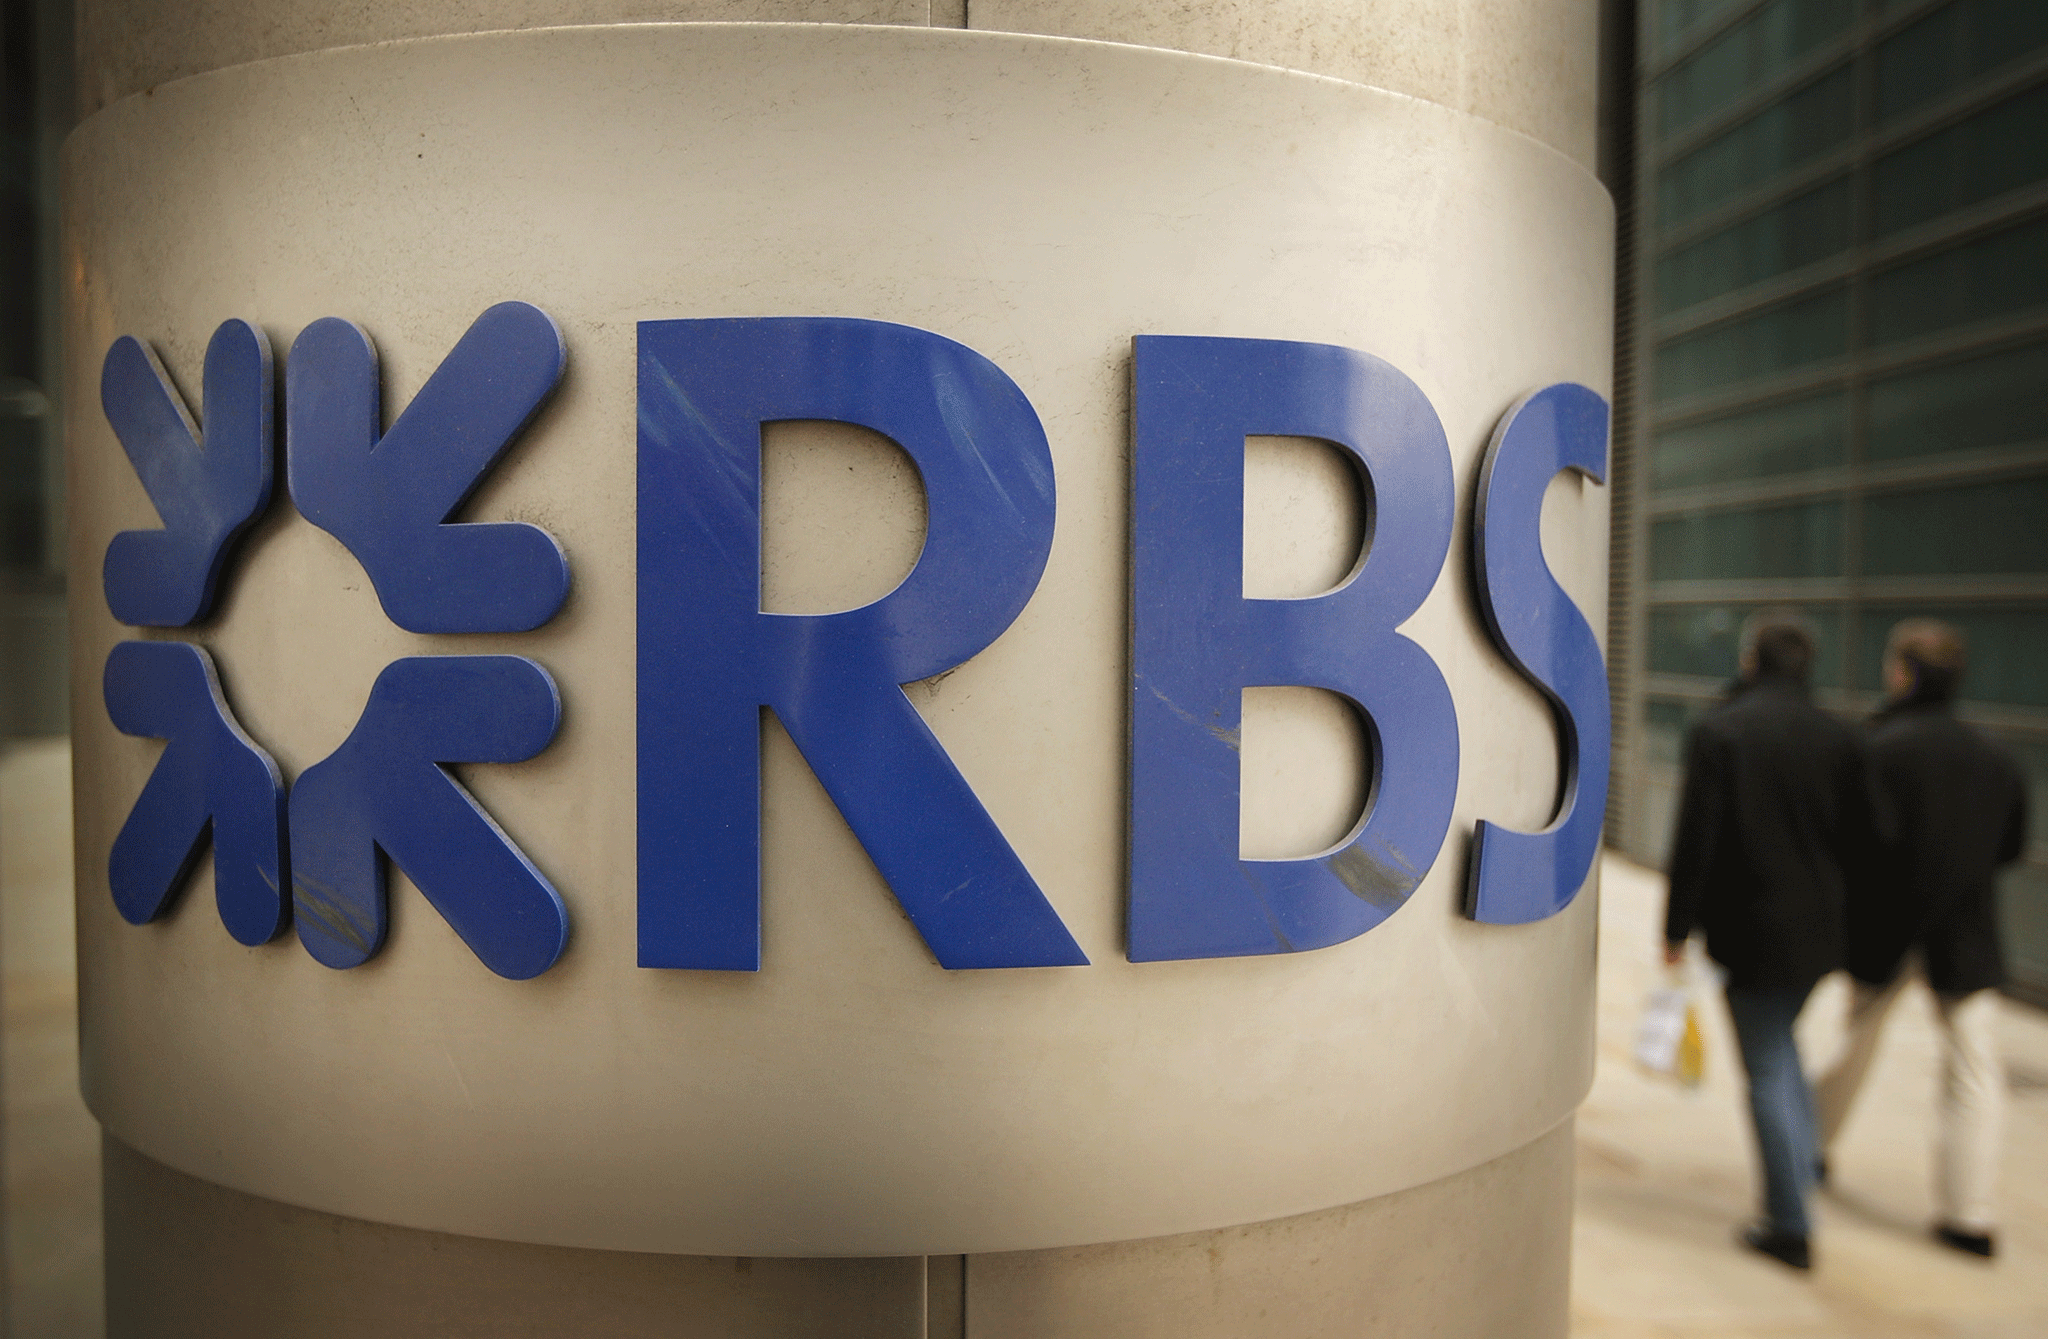 RBS jumped more than 6 per cent, or 15.8p to 258.2p, following an announcement of the Treasury's proposals